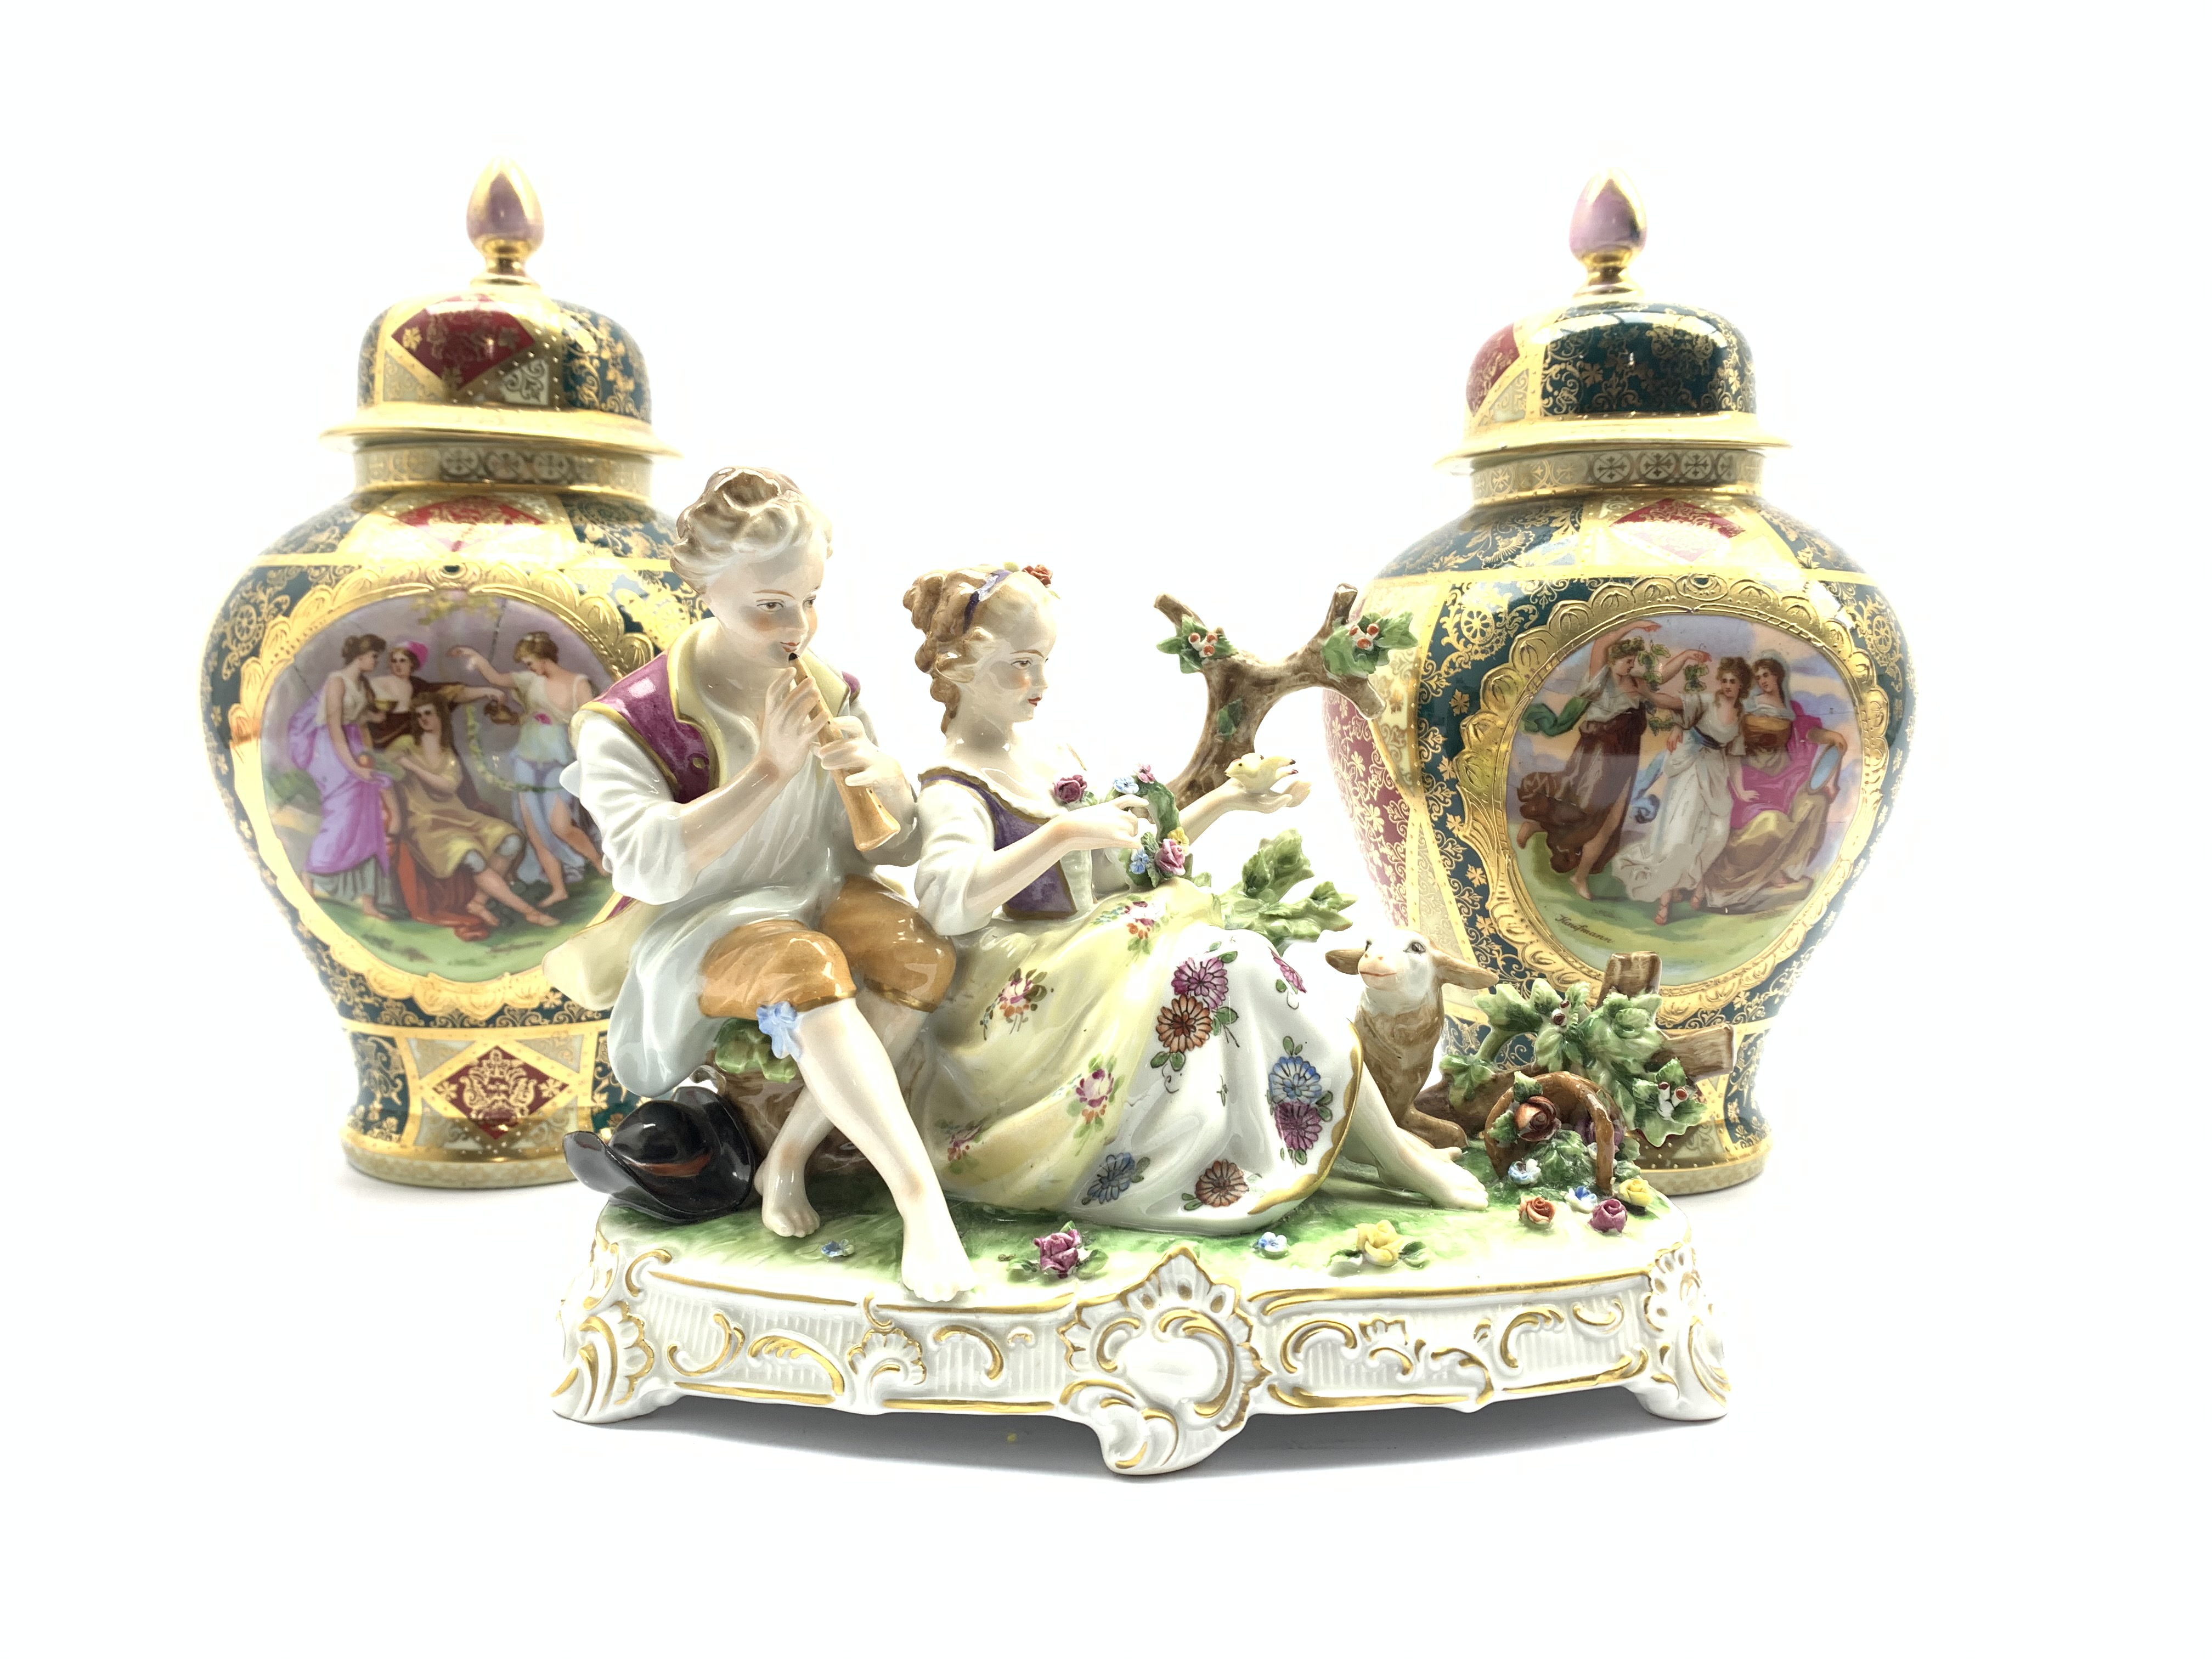 Pair of Vienna style vases and covers decorated with panels of figures after Angelica Kaufmann with